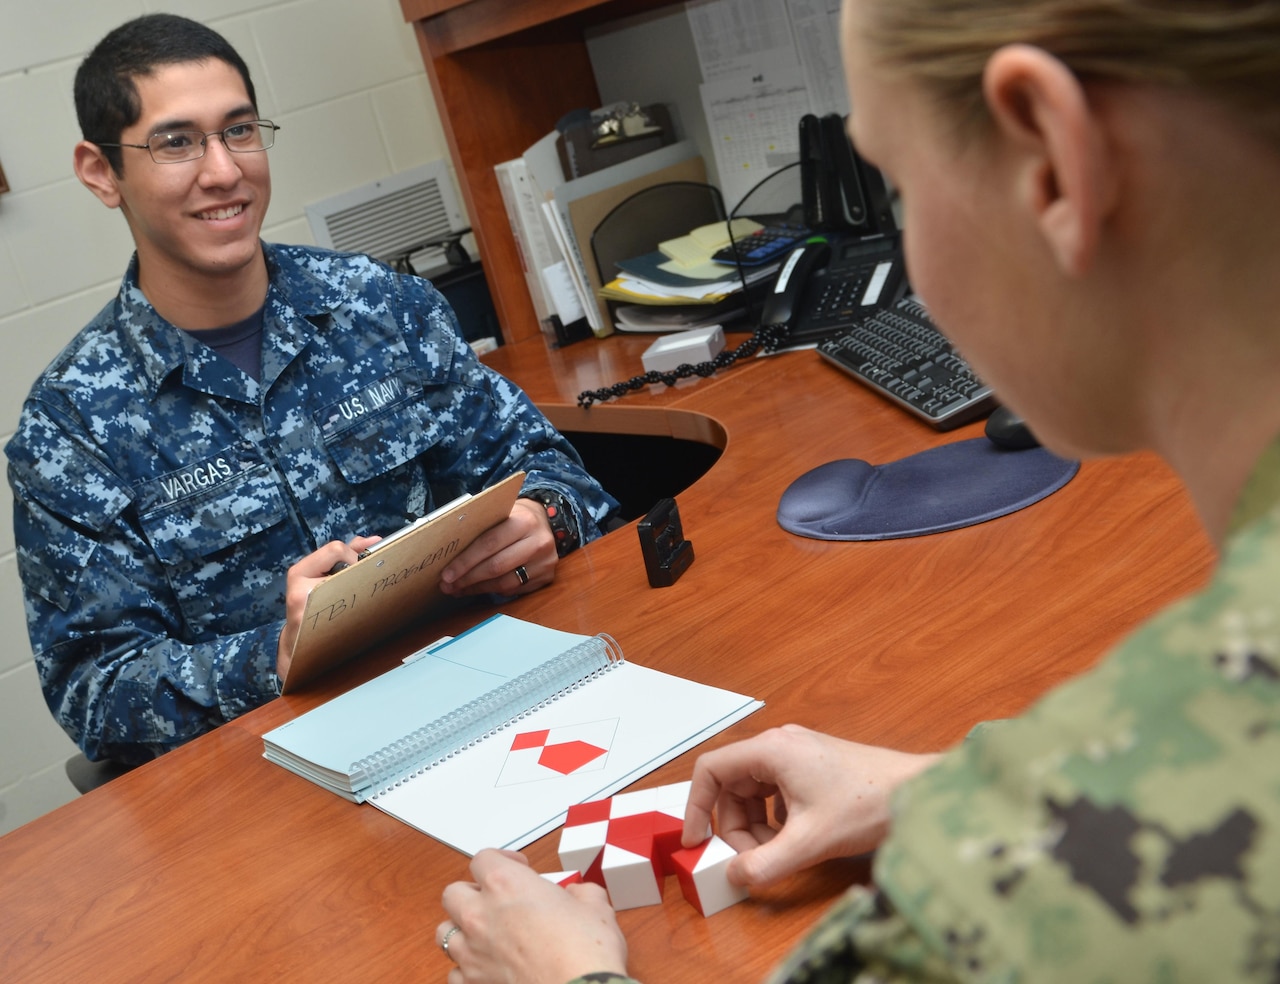 Navy Seaman David Vargas, left, a behavioral health technician, conducts a block design test on a patient to assess functioning of the parietal and frontal lobes at Naval Hospital Jacksonville in Florida, Feb. 1, 2017. March is Brain Injury Awareness Month. Navy photo by Jacob Sippel